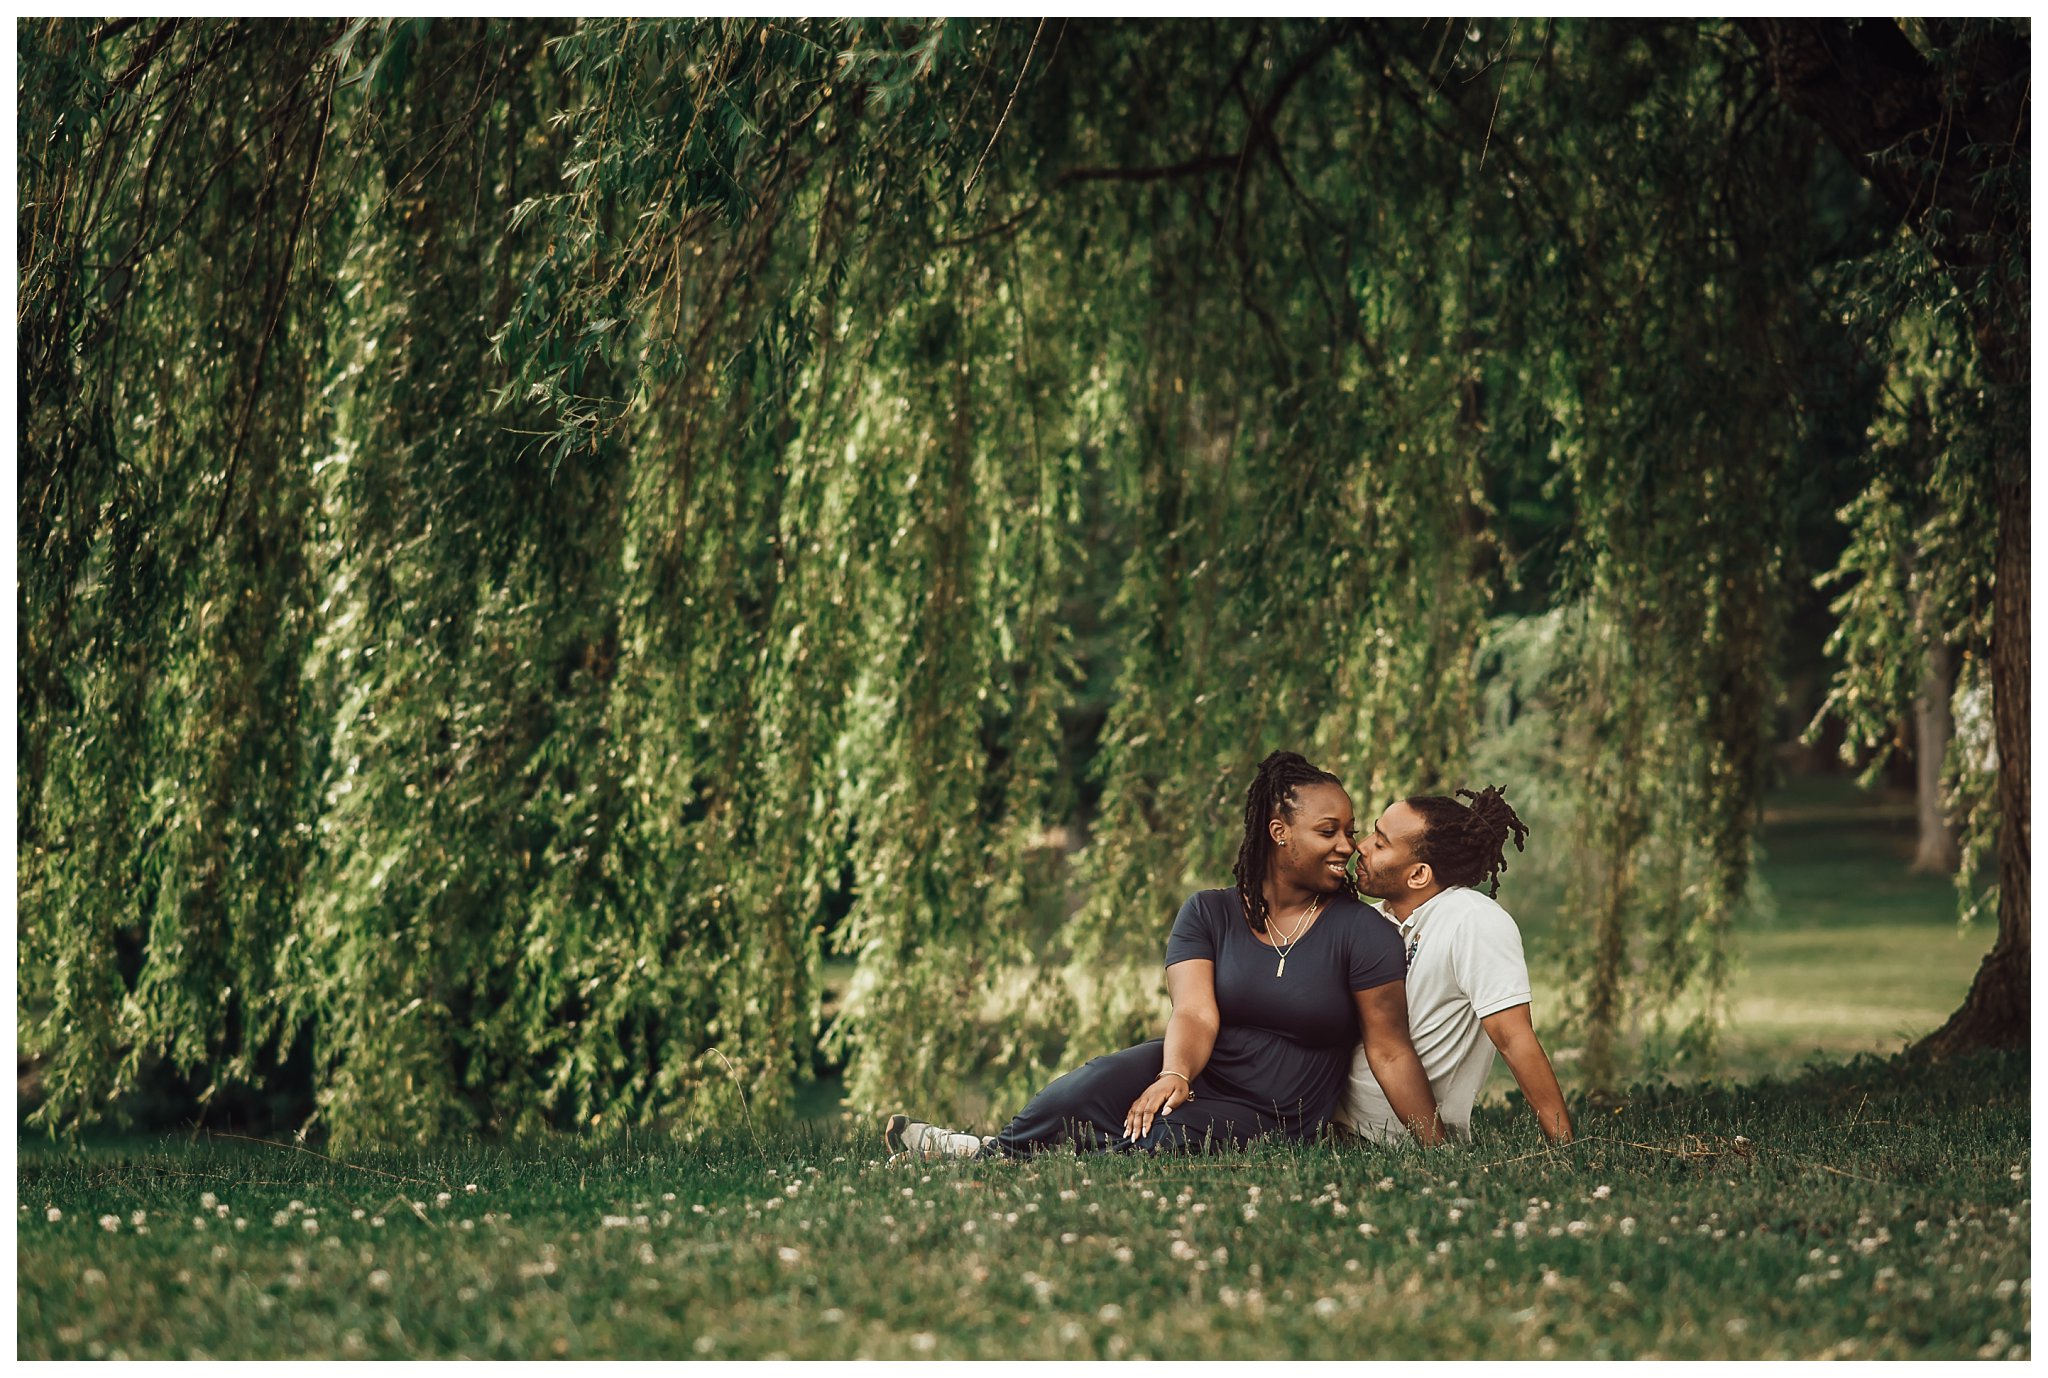 Darcia and Tyler enjoyed the beauty of during their engagement session at Onondaga Park